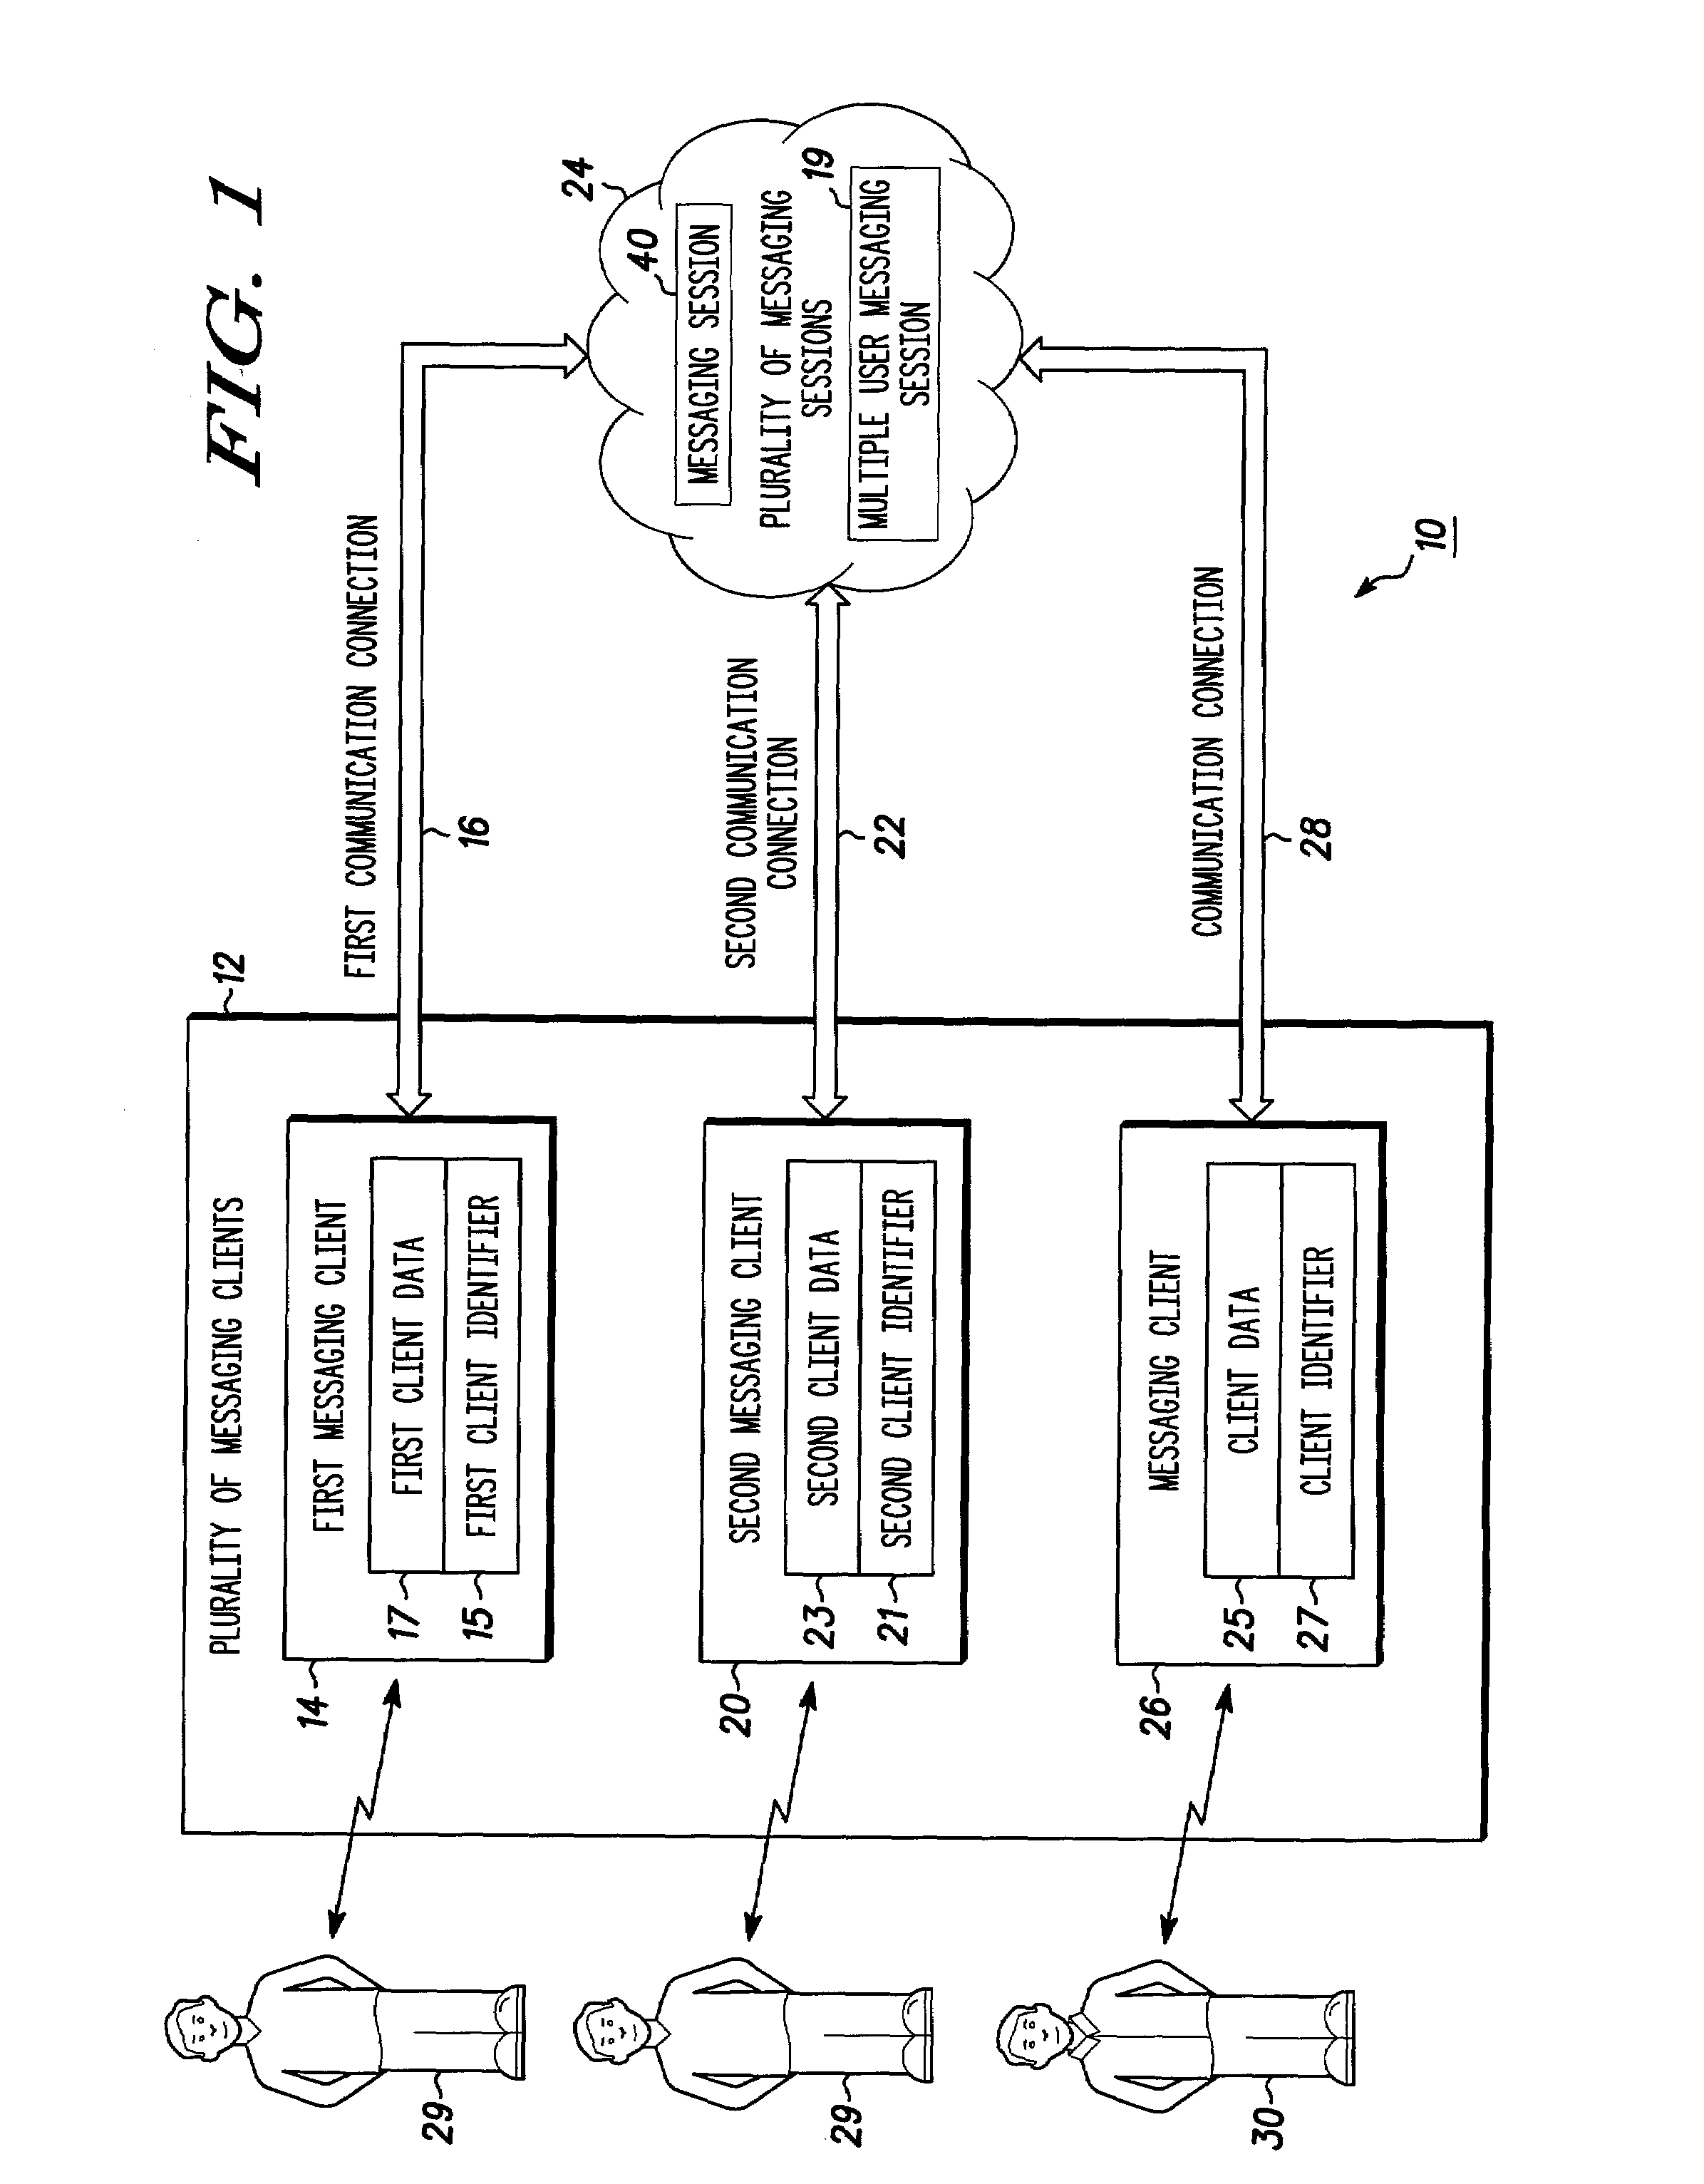 System for providing continuity between messaging clients and method therefor